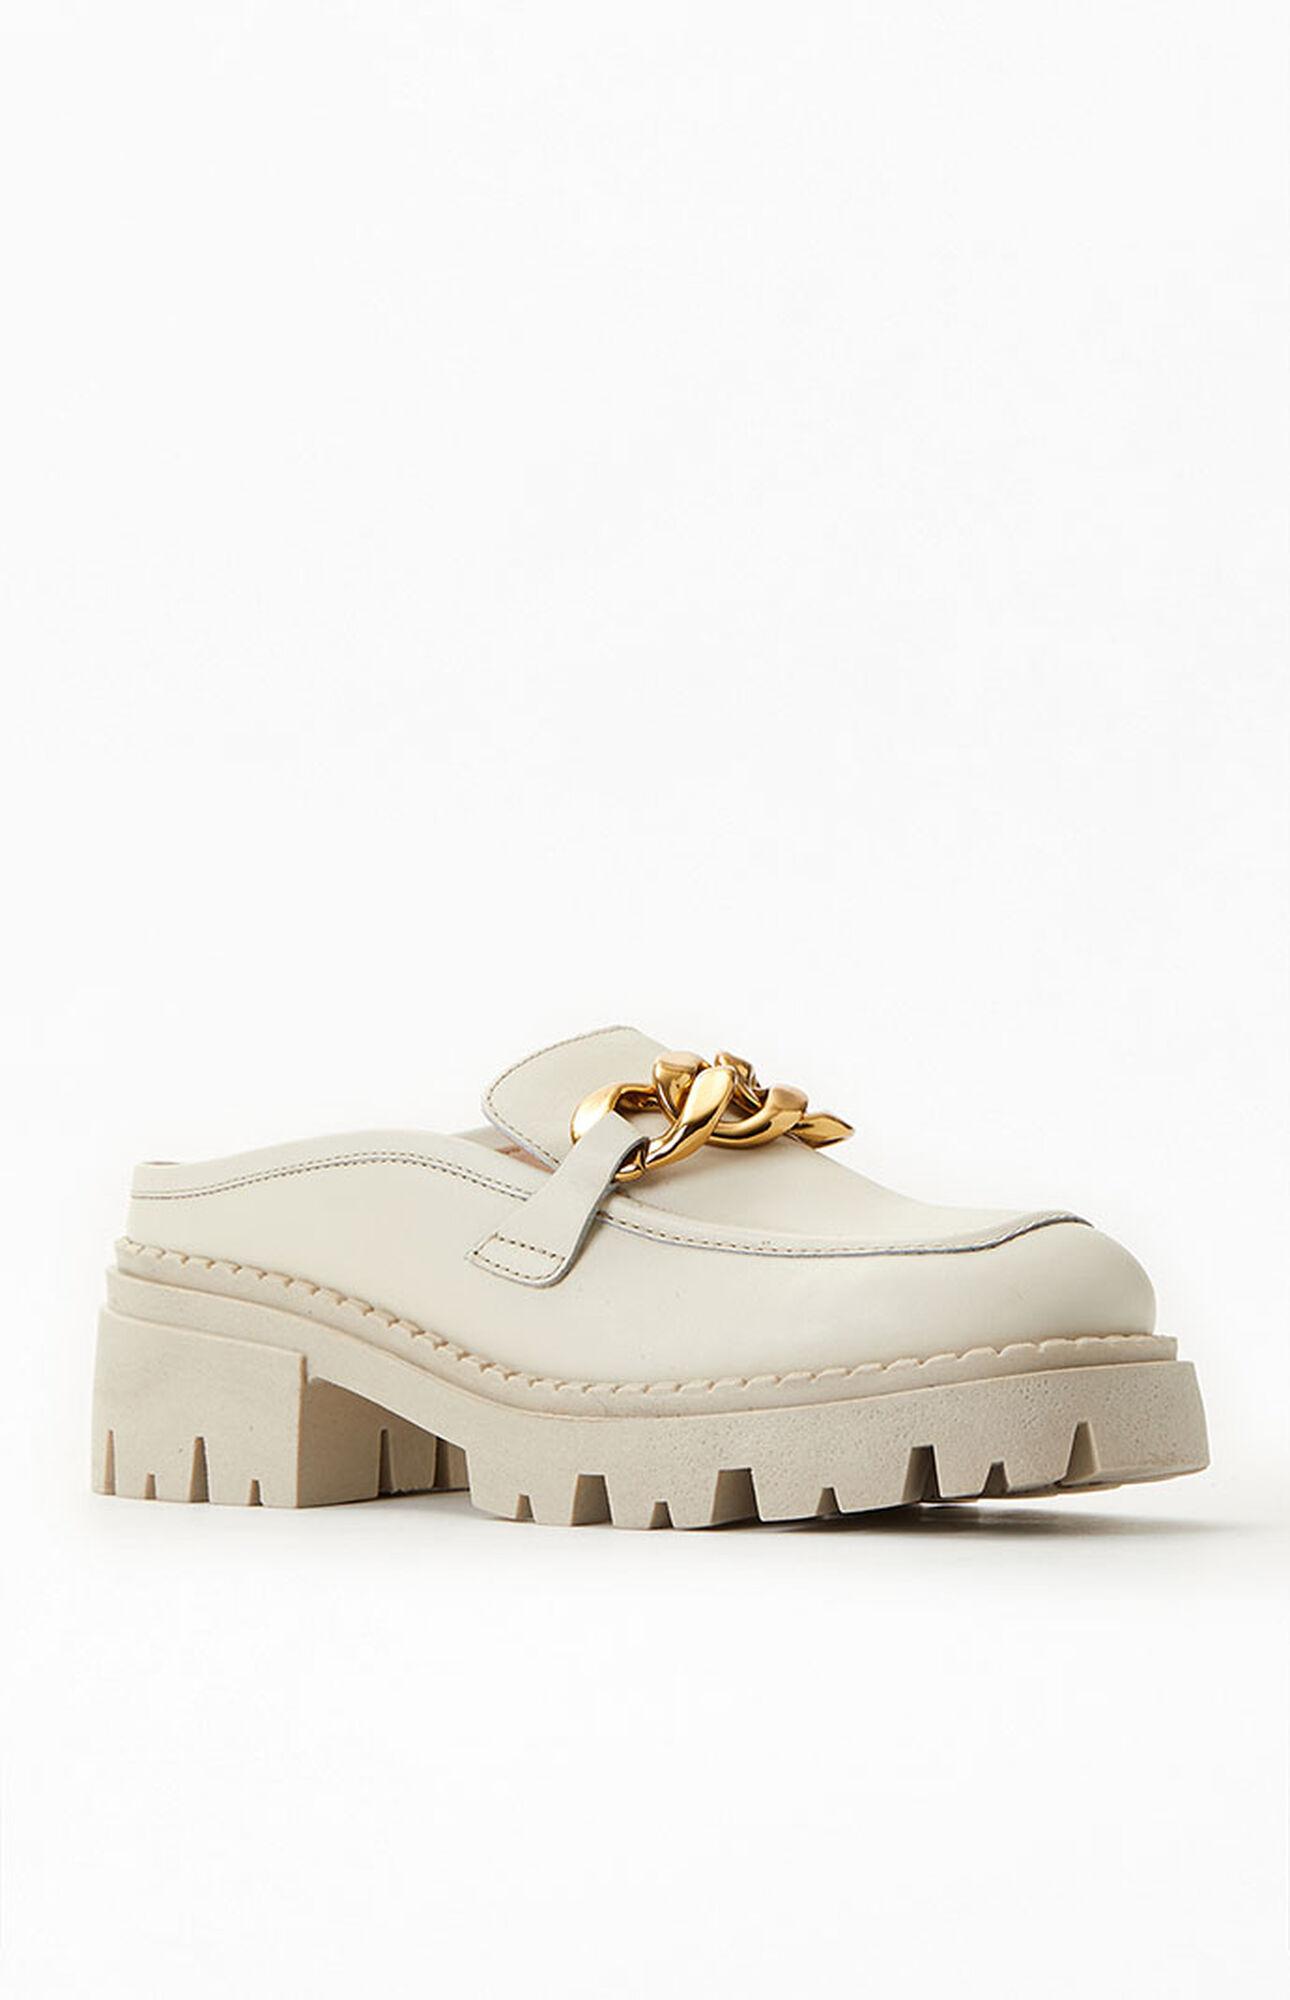 Free People Bone Lyra Link Loafer Mules in White | Lyst